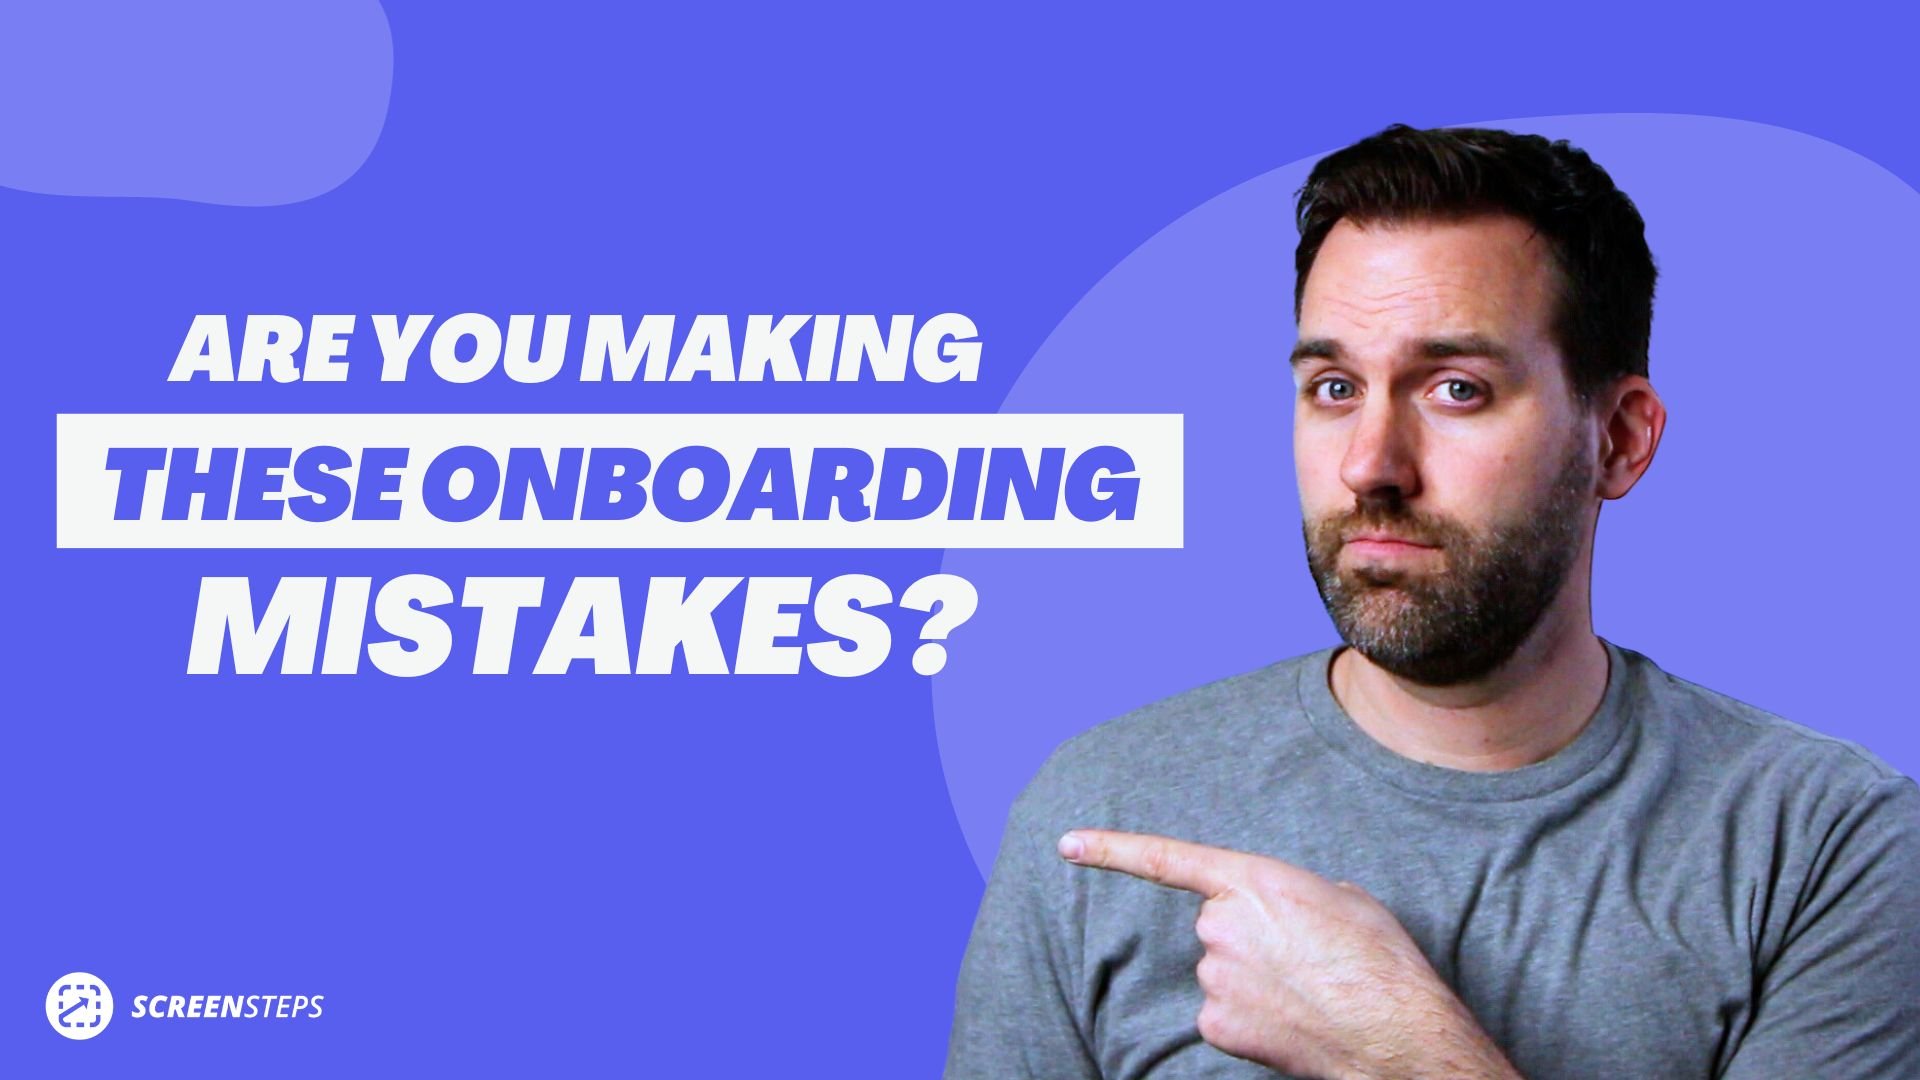 3 Common Mistakes Companies Make When Onboarding New Hires